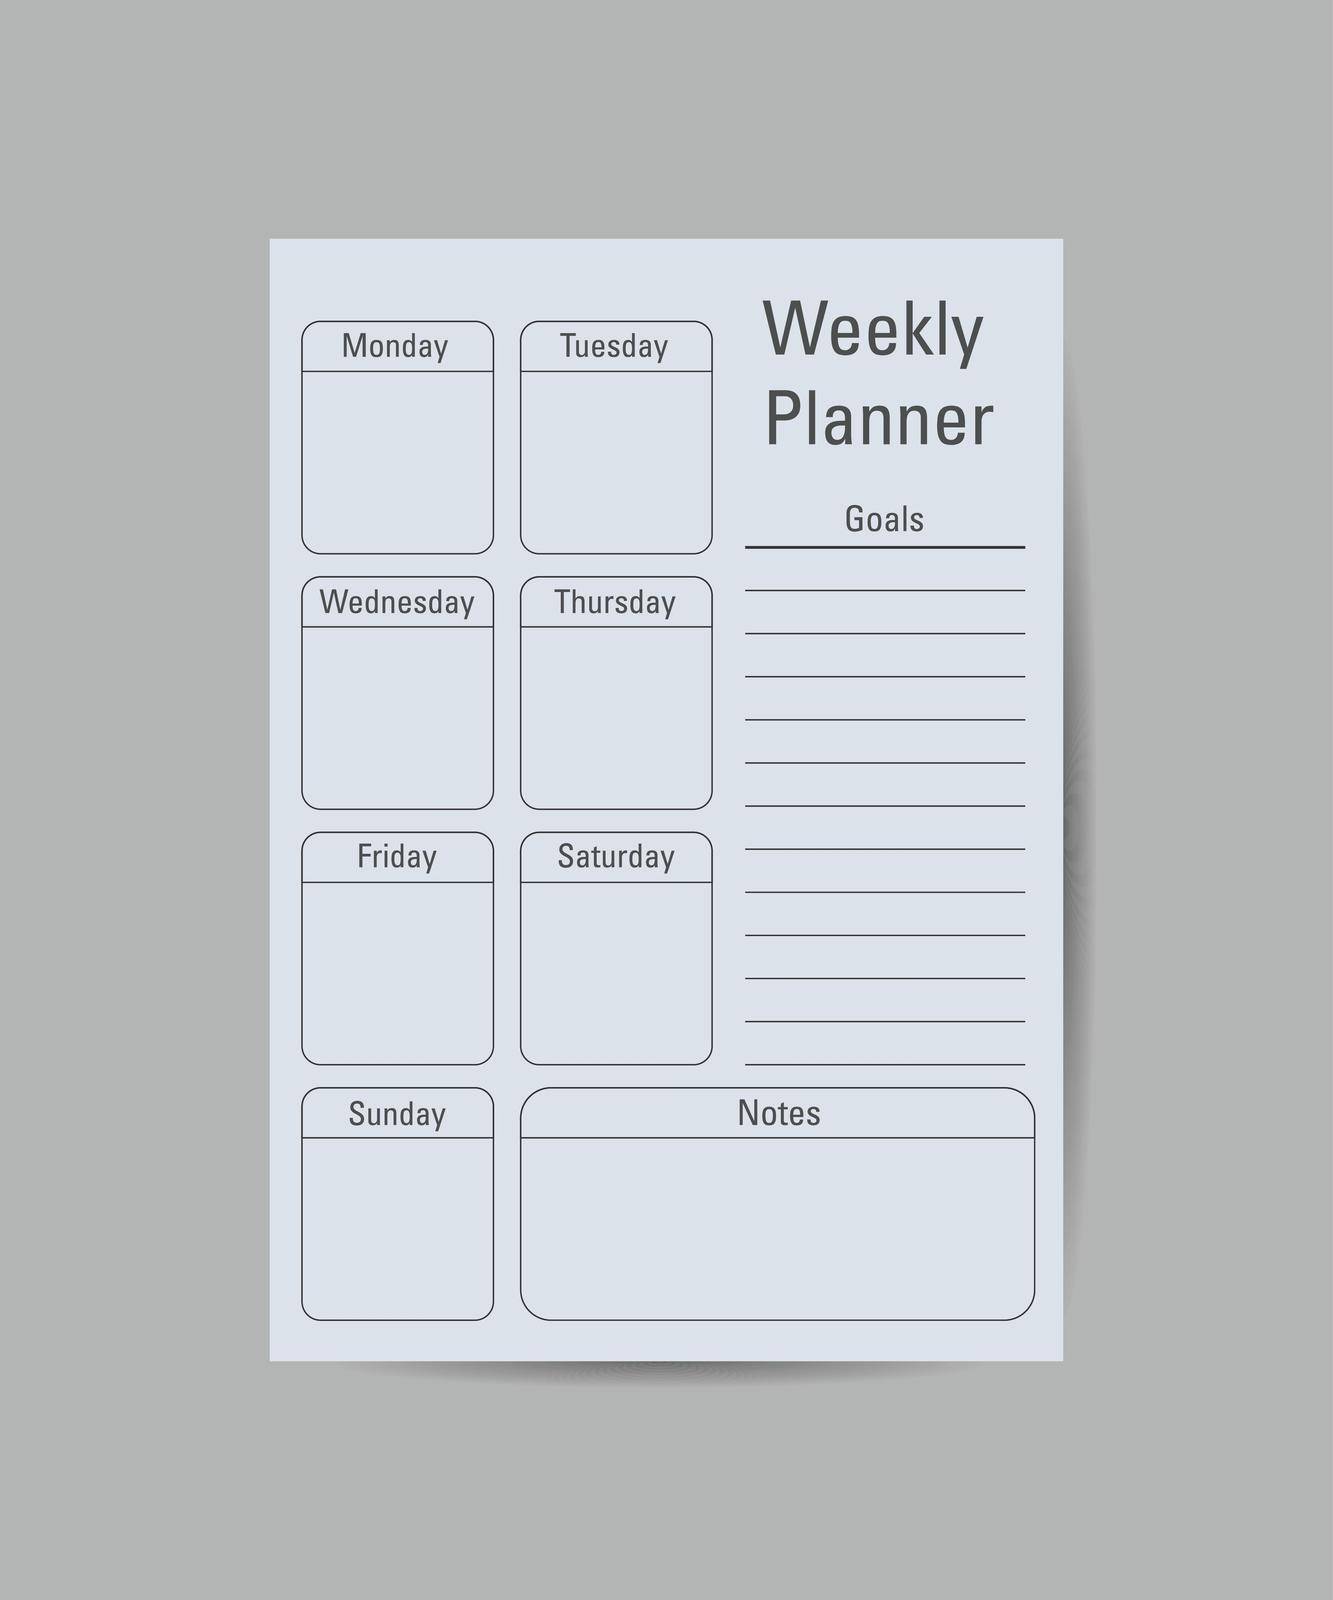 weekly and daily planner page design template vector. Plain design on blue background by ANITA